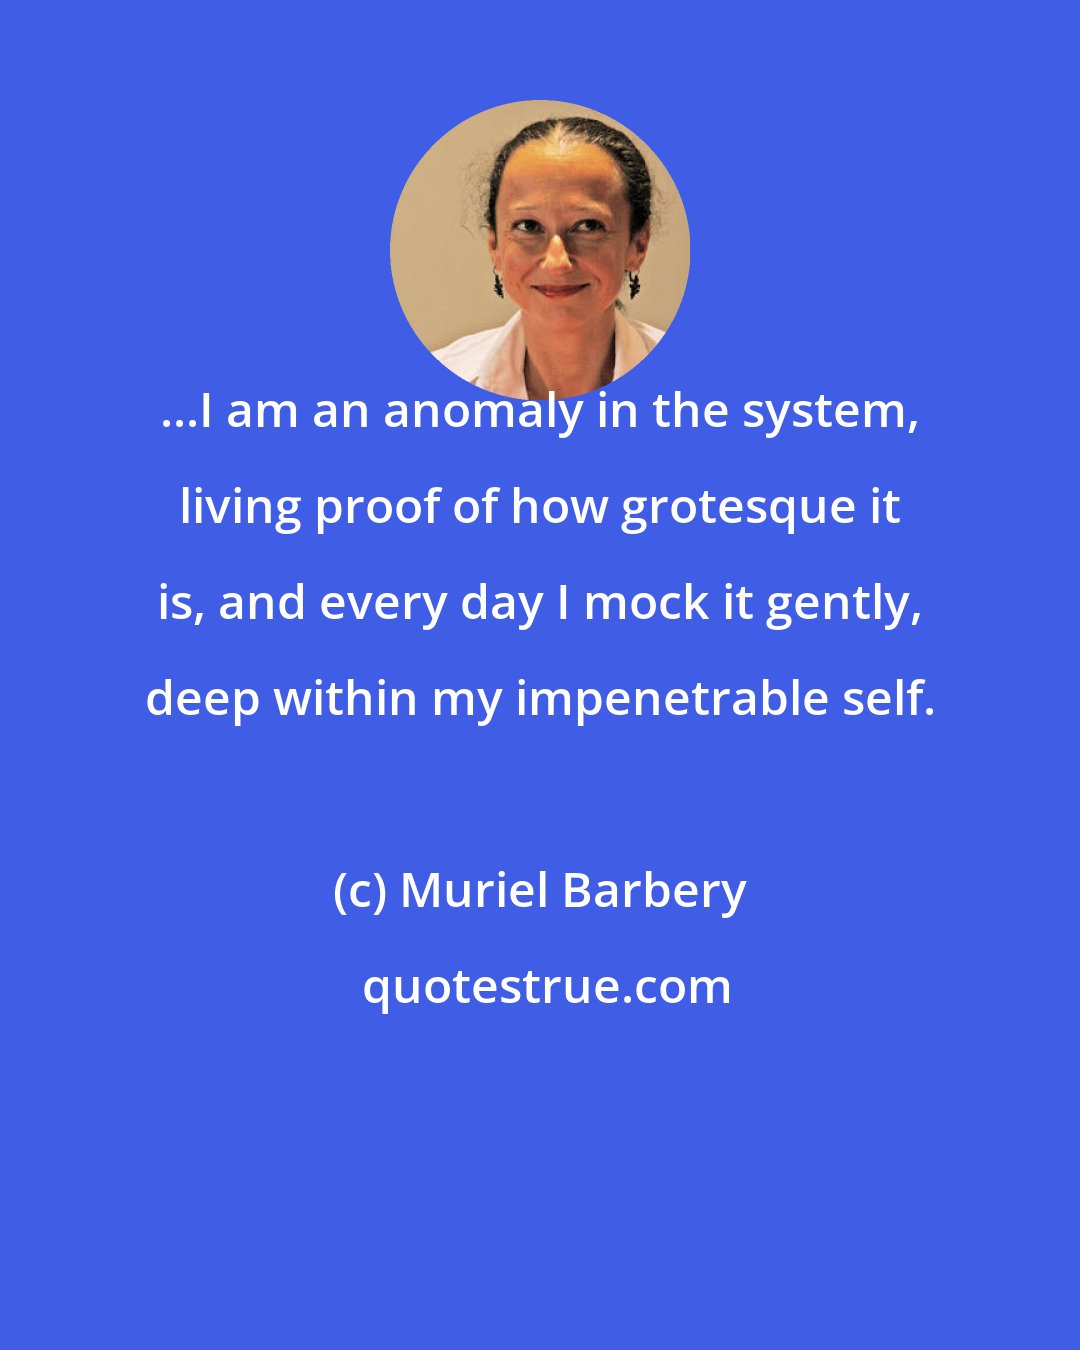 Muriel Barbery: ...I am an anomaly in the system, living proof of how grotesque it is, and every day I mock it gently, deep within my impenetrable self.